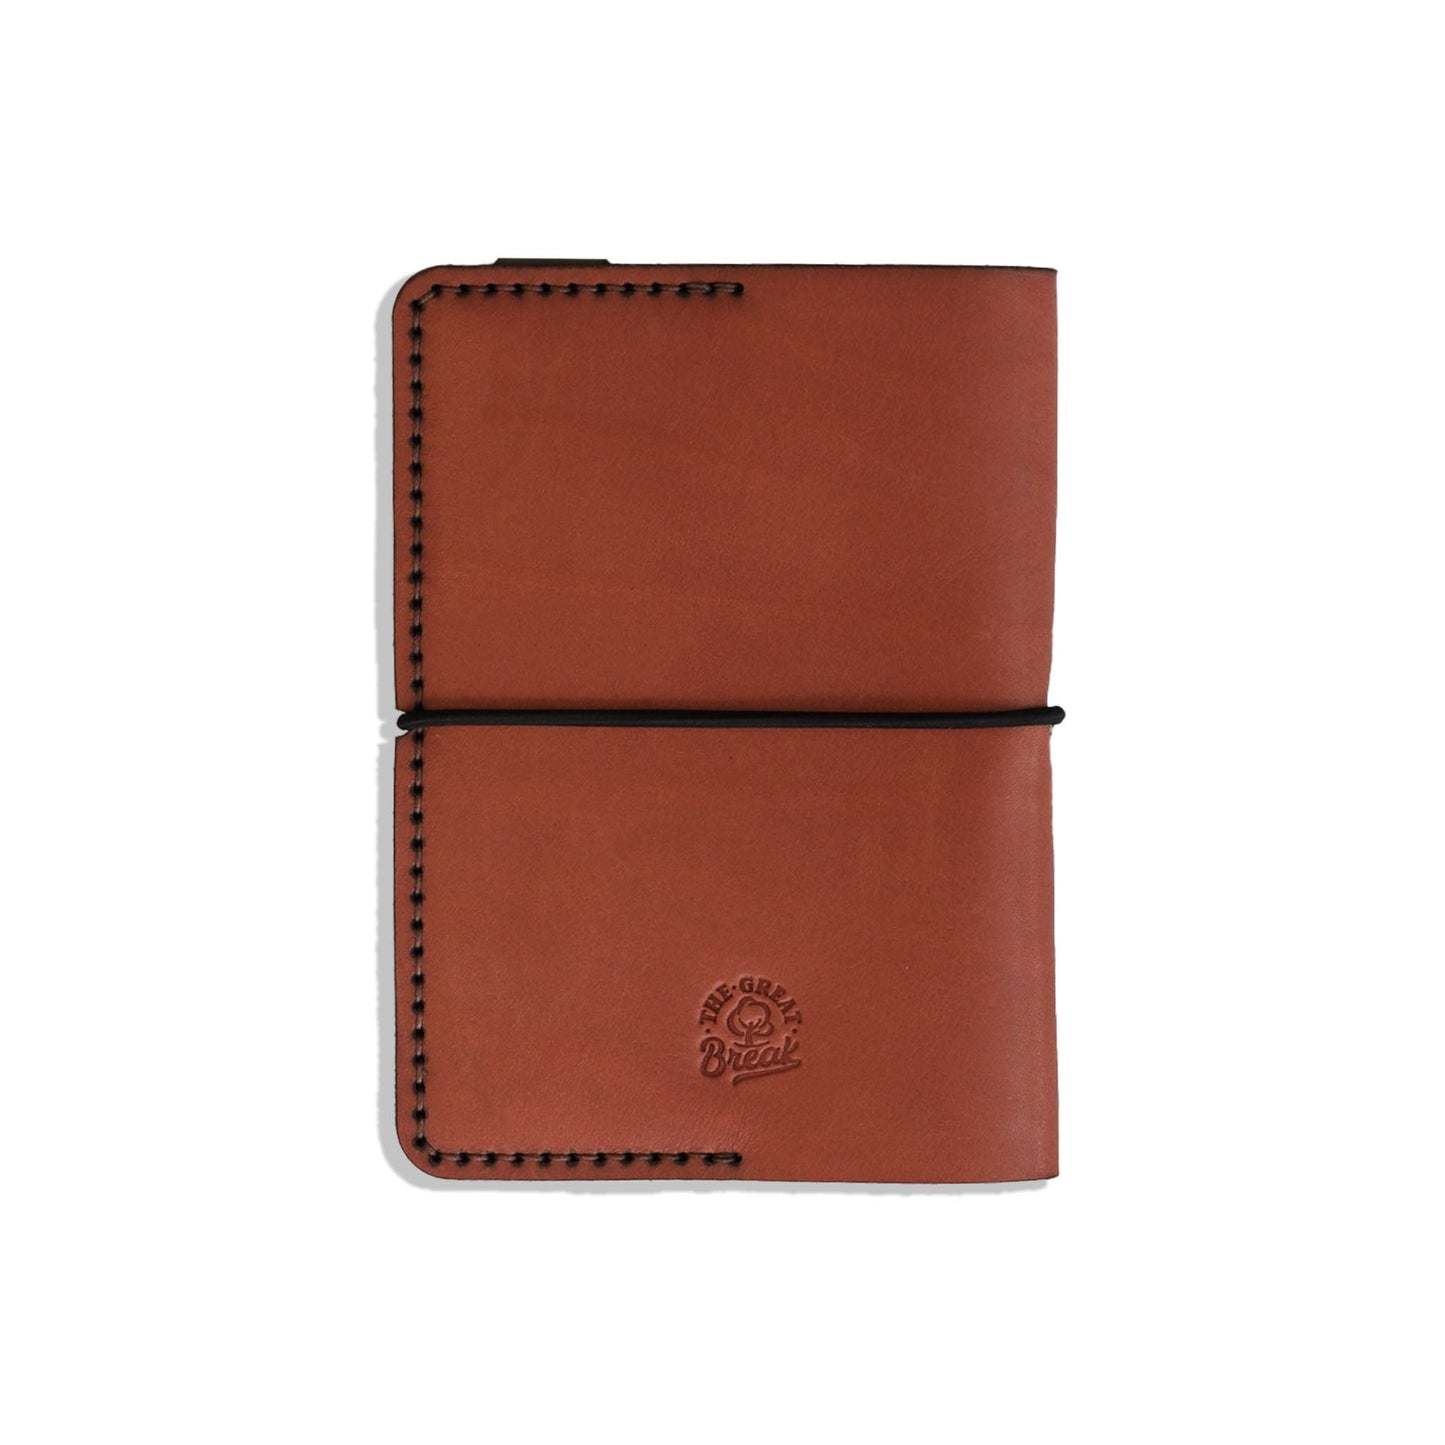 A6 Leather Notebook Cover - Adventure Range - The Great Break